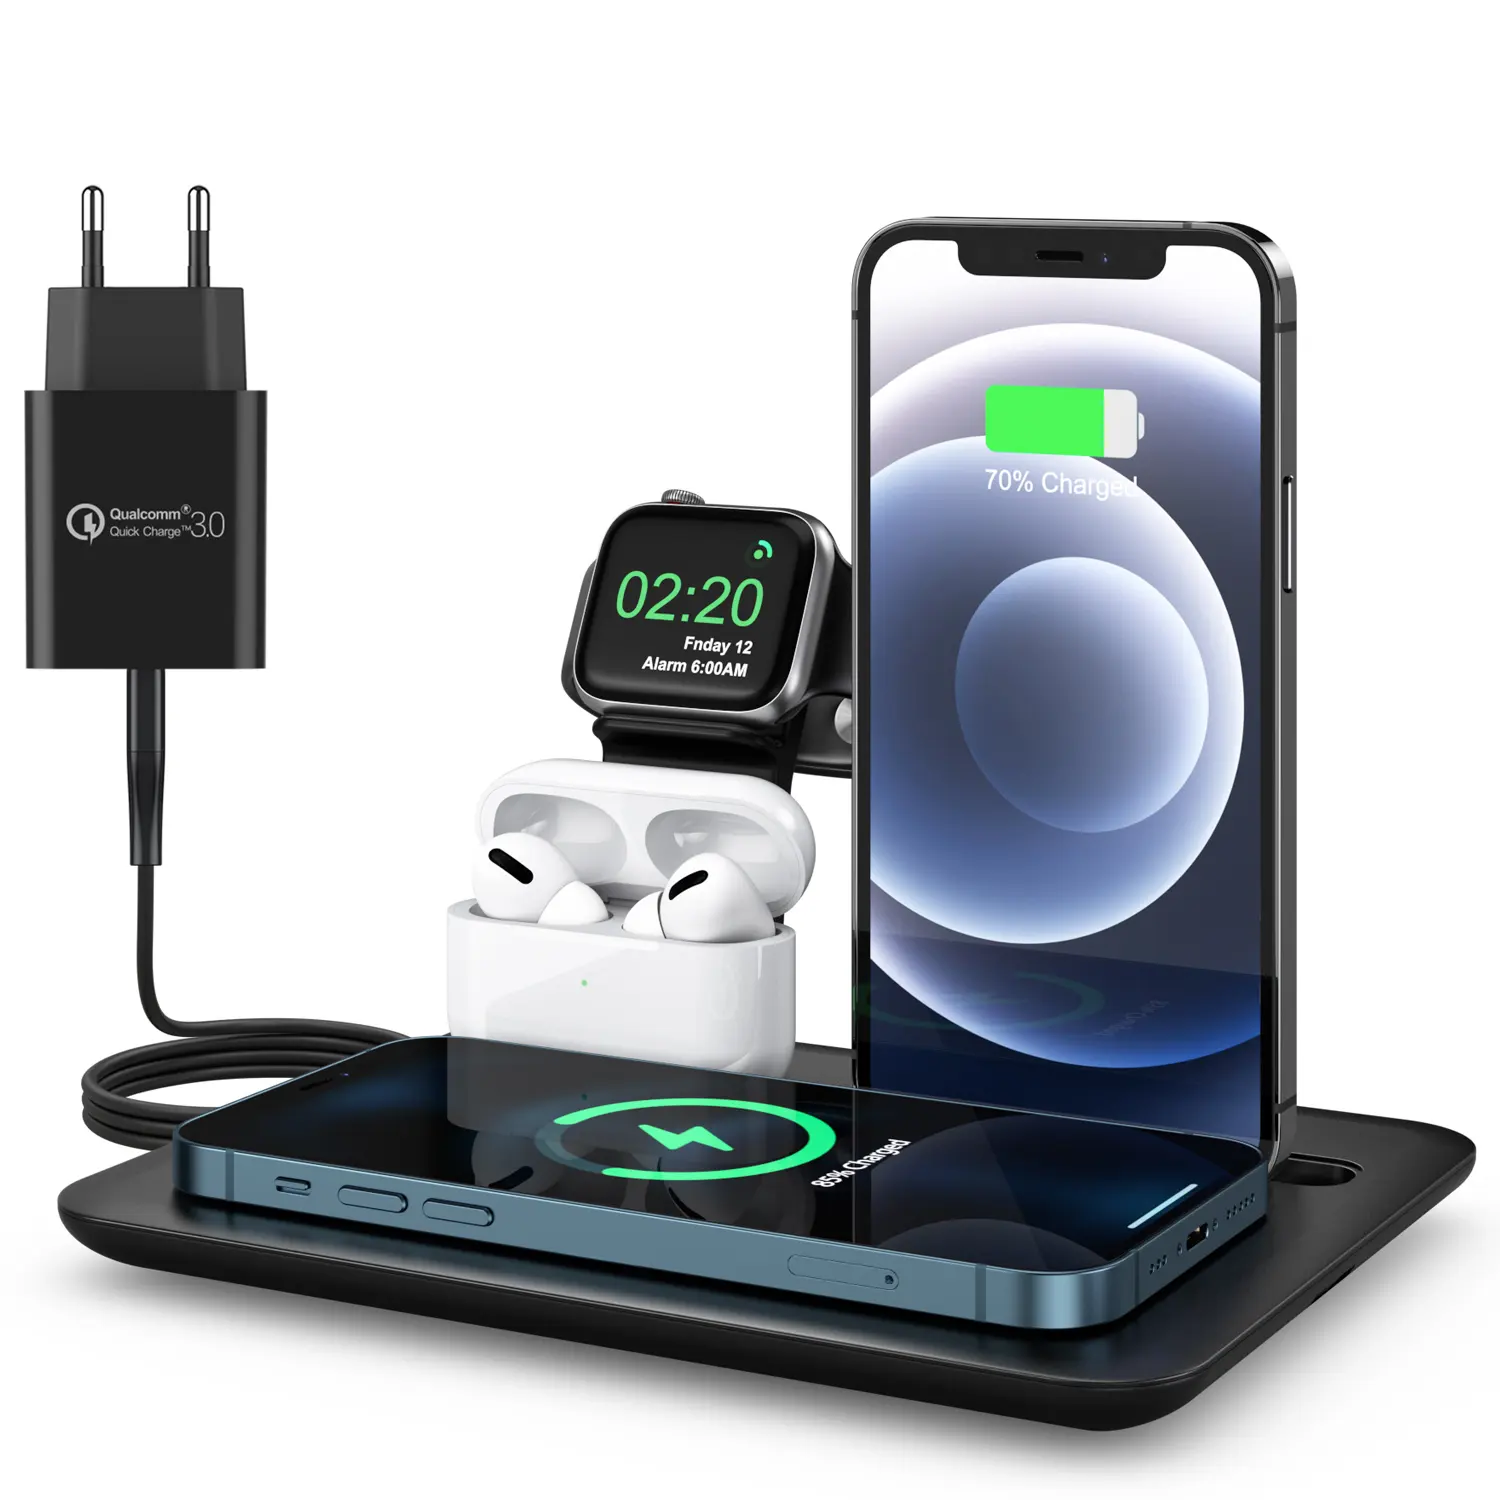 Show Wish 1 Piece Free Sample Wireless Charger wireless charging station Multifunction Chargers for iPhone iwatch AirPods Pro